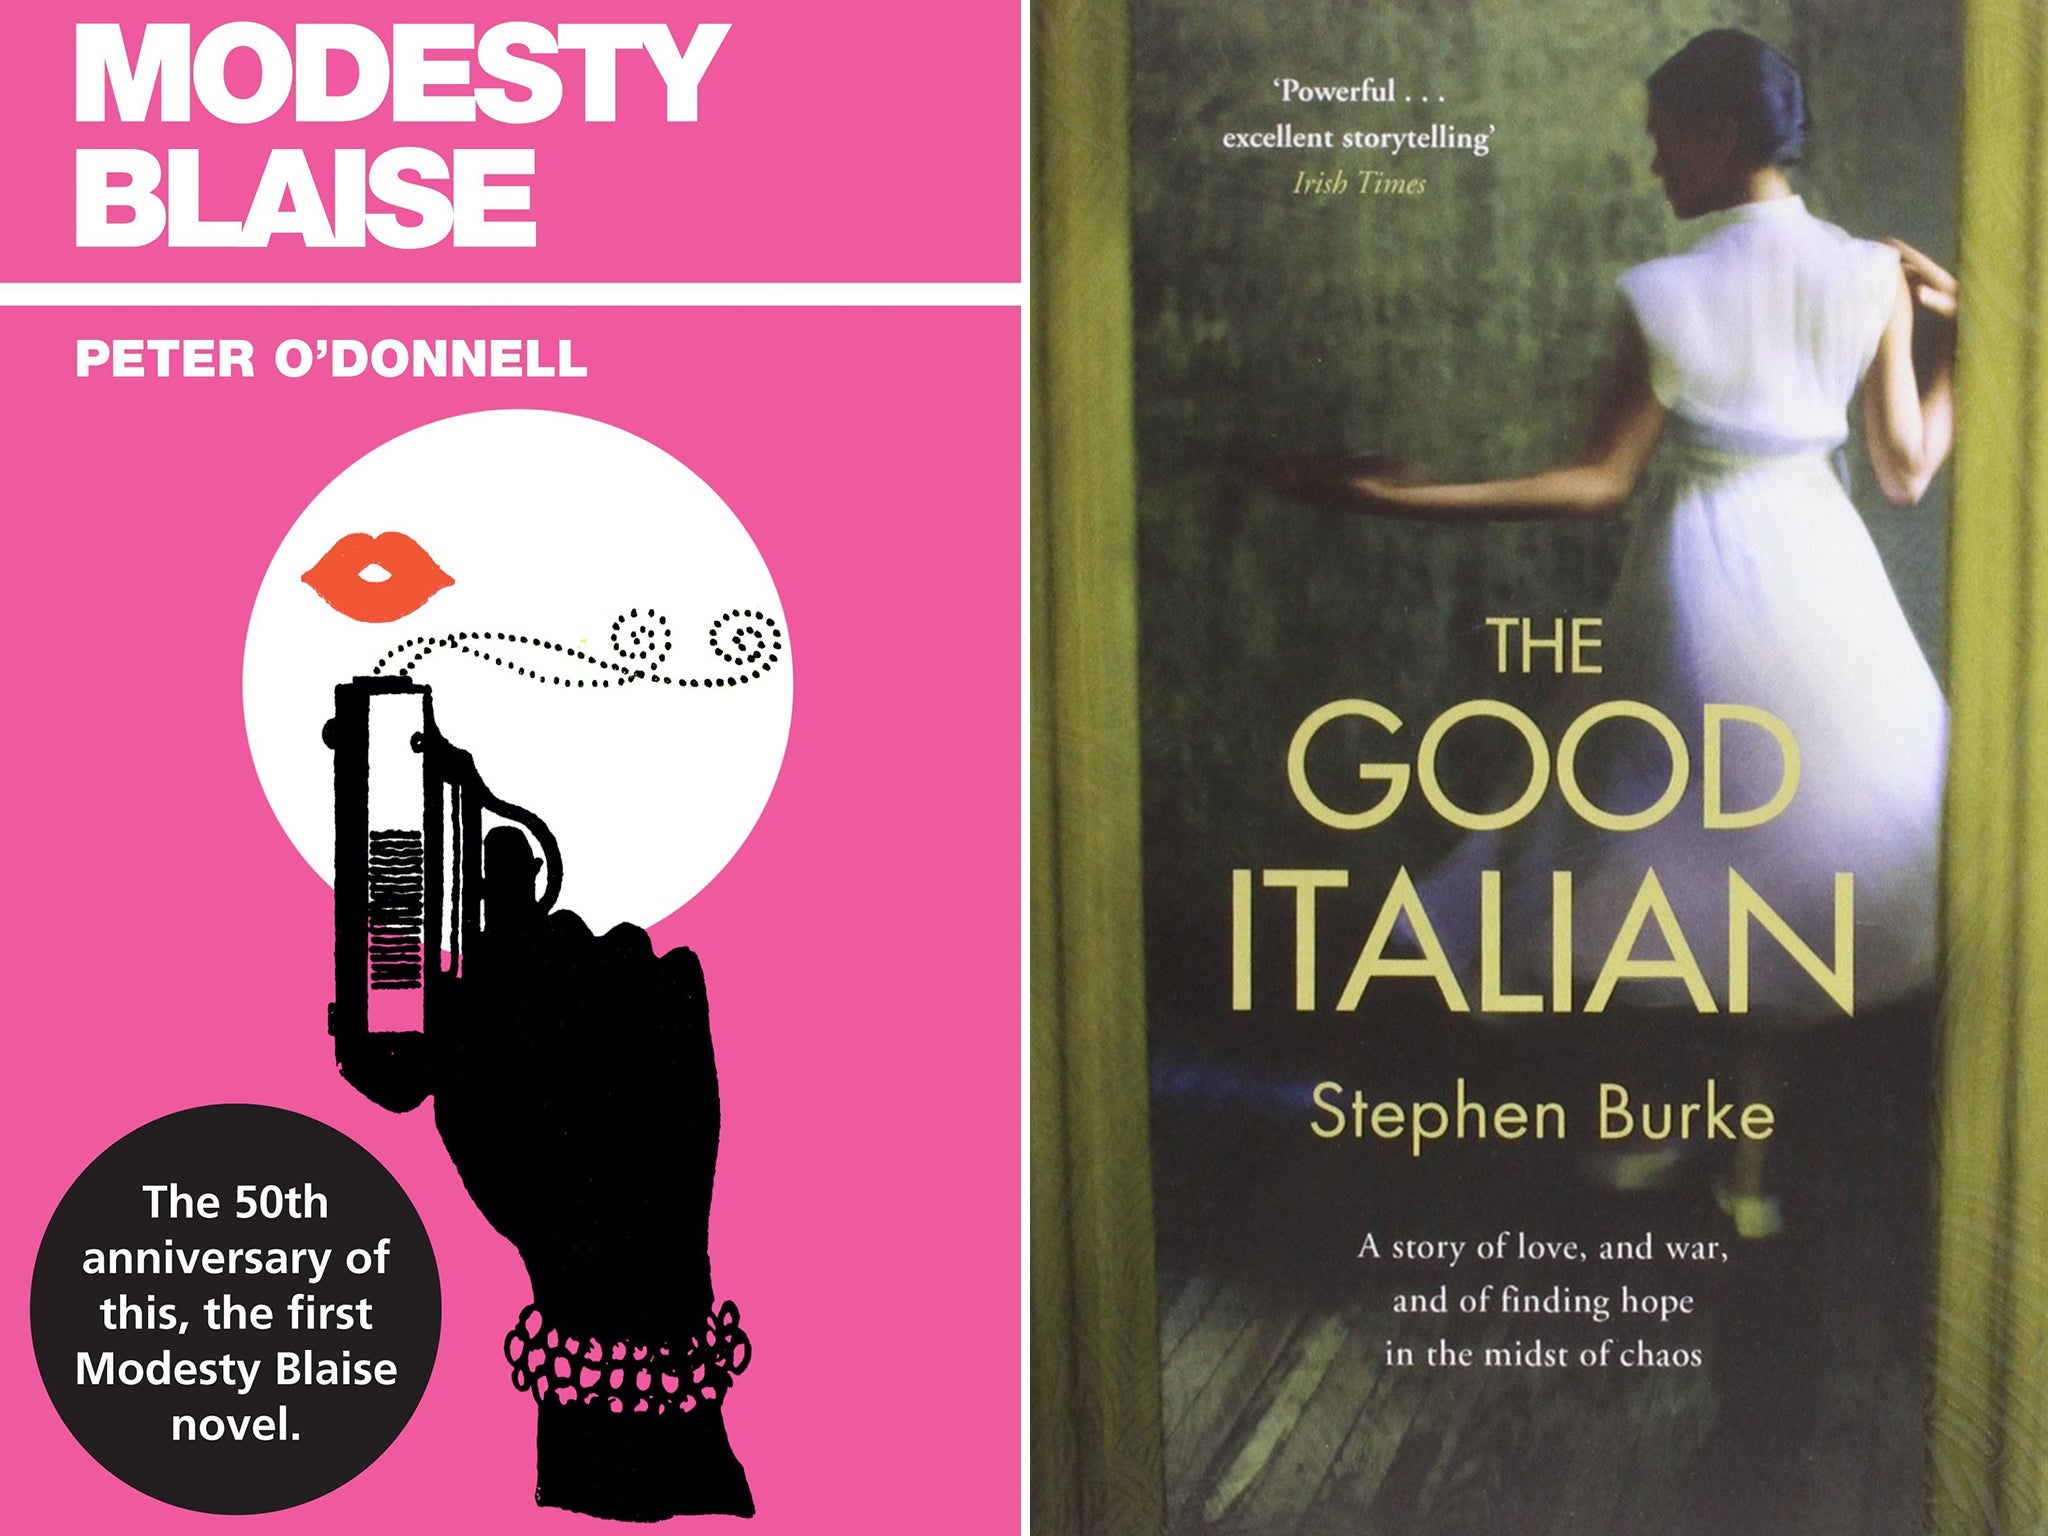 Modesty Blaise by Peter O’Donnell and The Good Italian by Stephen Burke